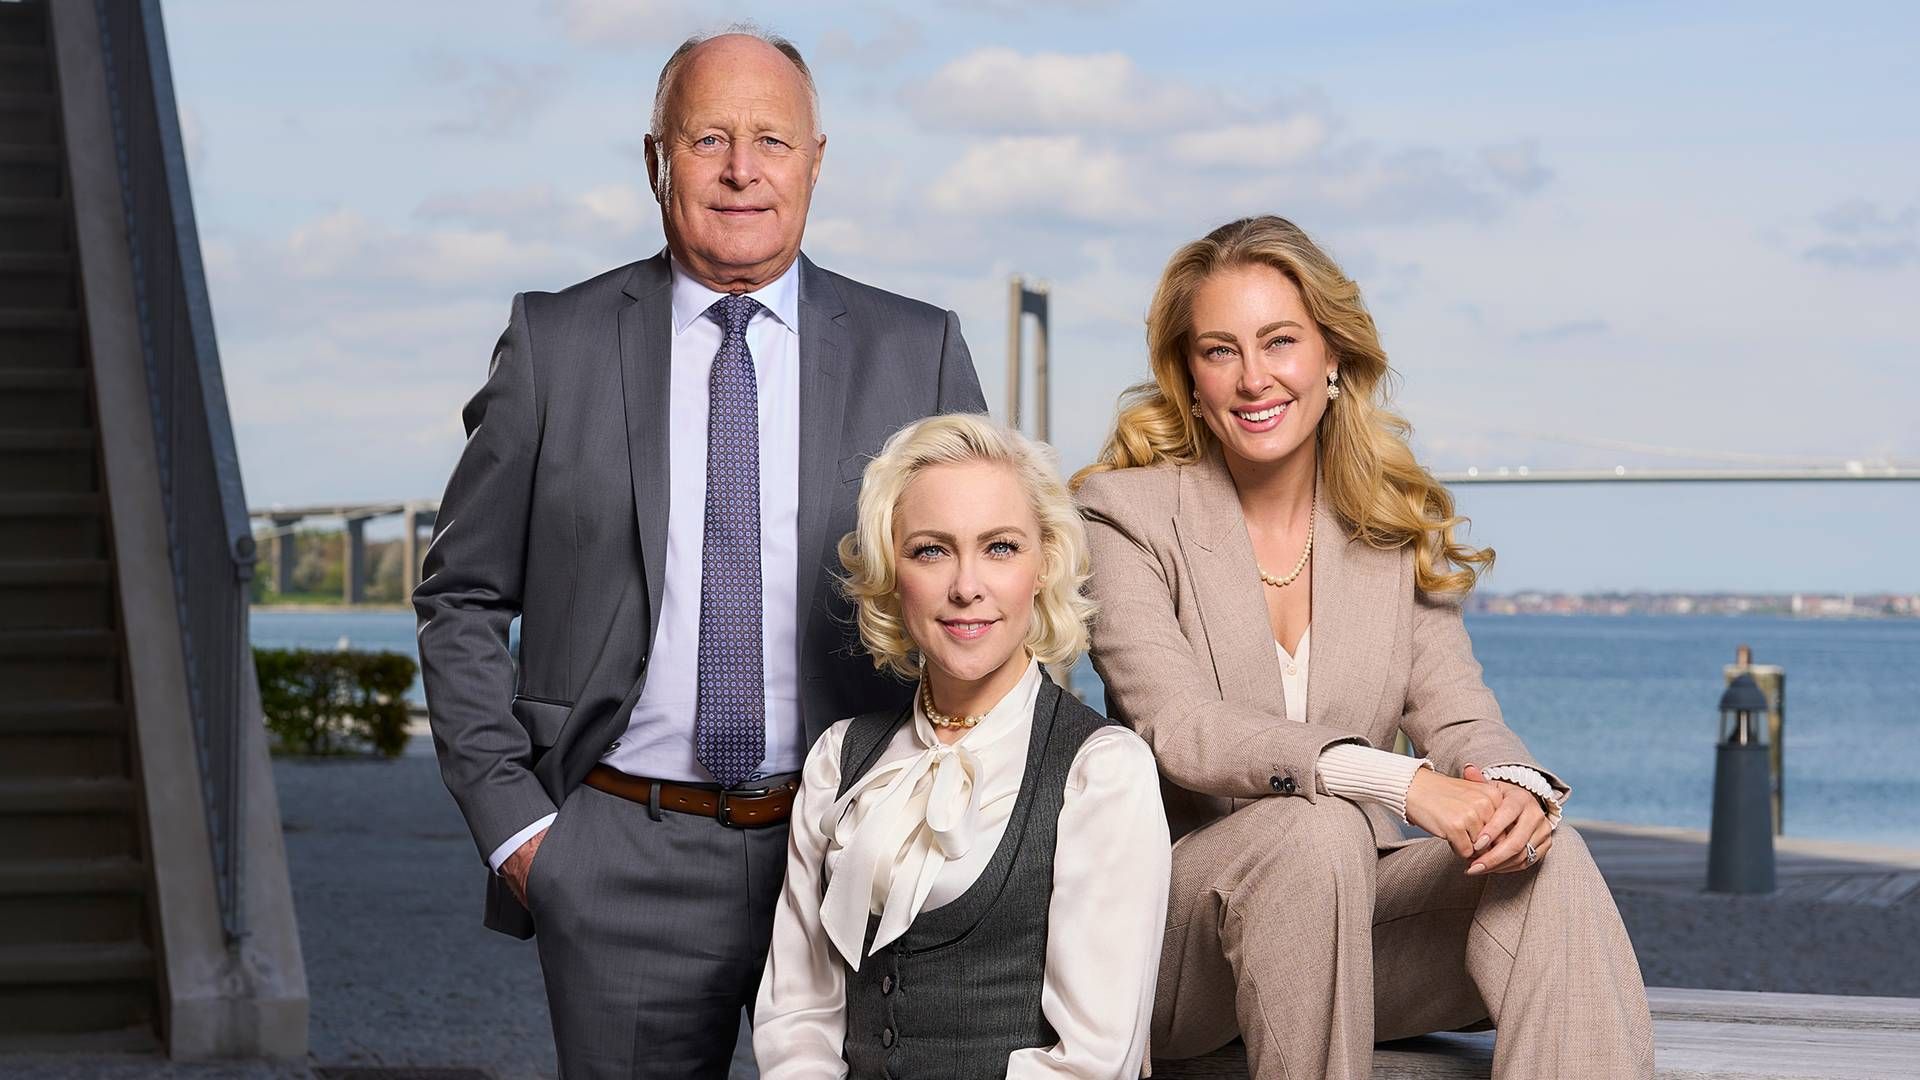 The owners of the USTC Group and the collapsed Nordic Waste, Torben Østergaard-Nielsen, Nina Østergaard Borris (center) and Mia Østergaard Rechnitzer, deliver yet another financial report with high earnings and can add to their personal fortune. | Photo: PR-foto USTC-koncernen